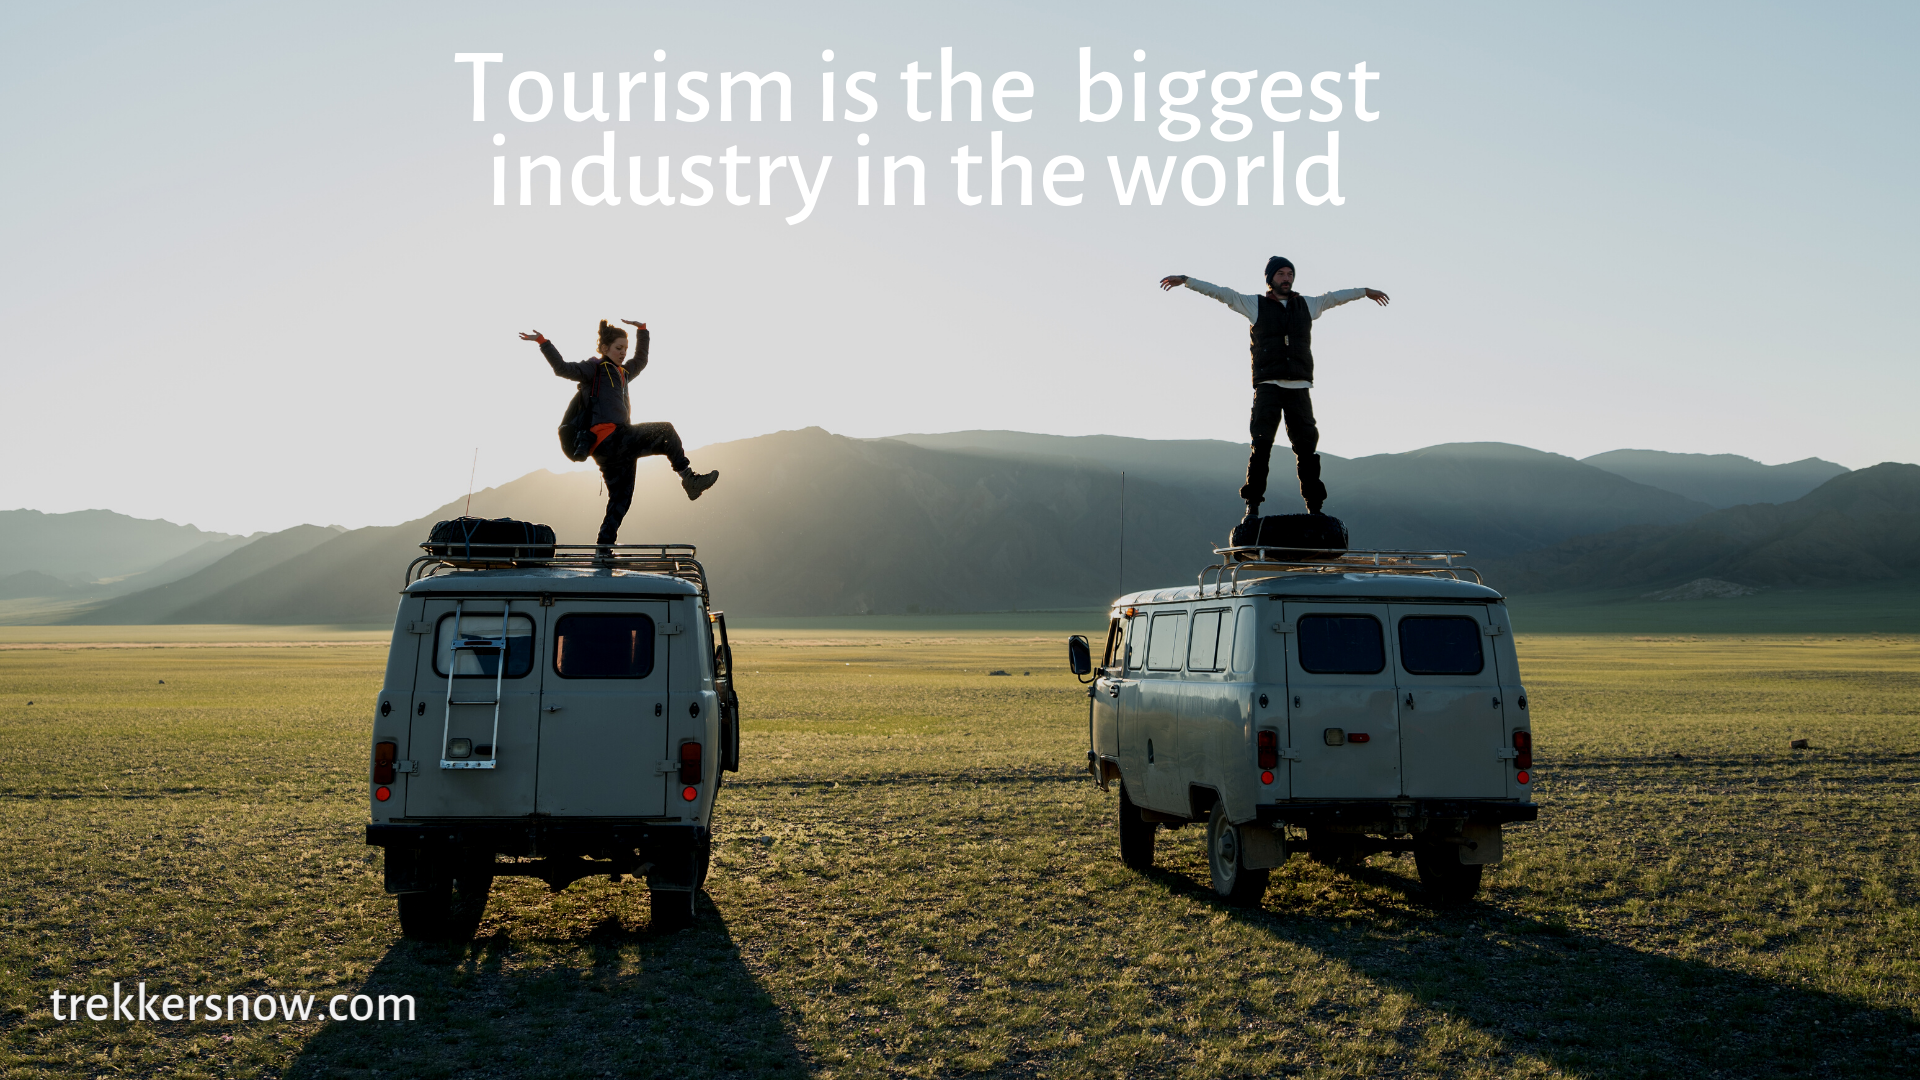 Tourism the World Largest Industry